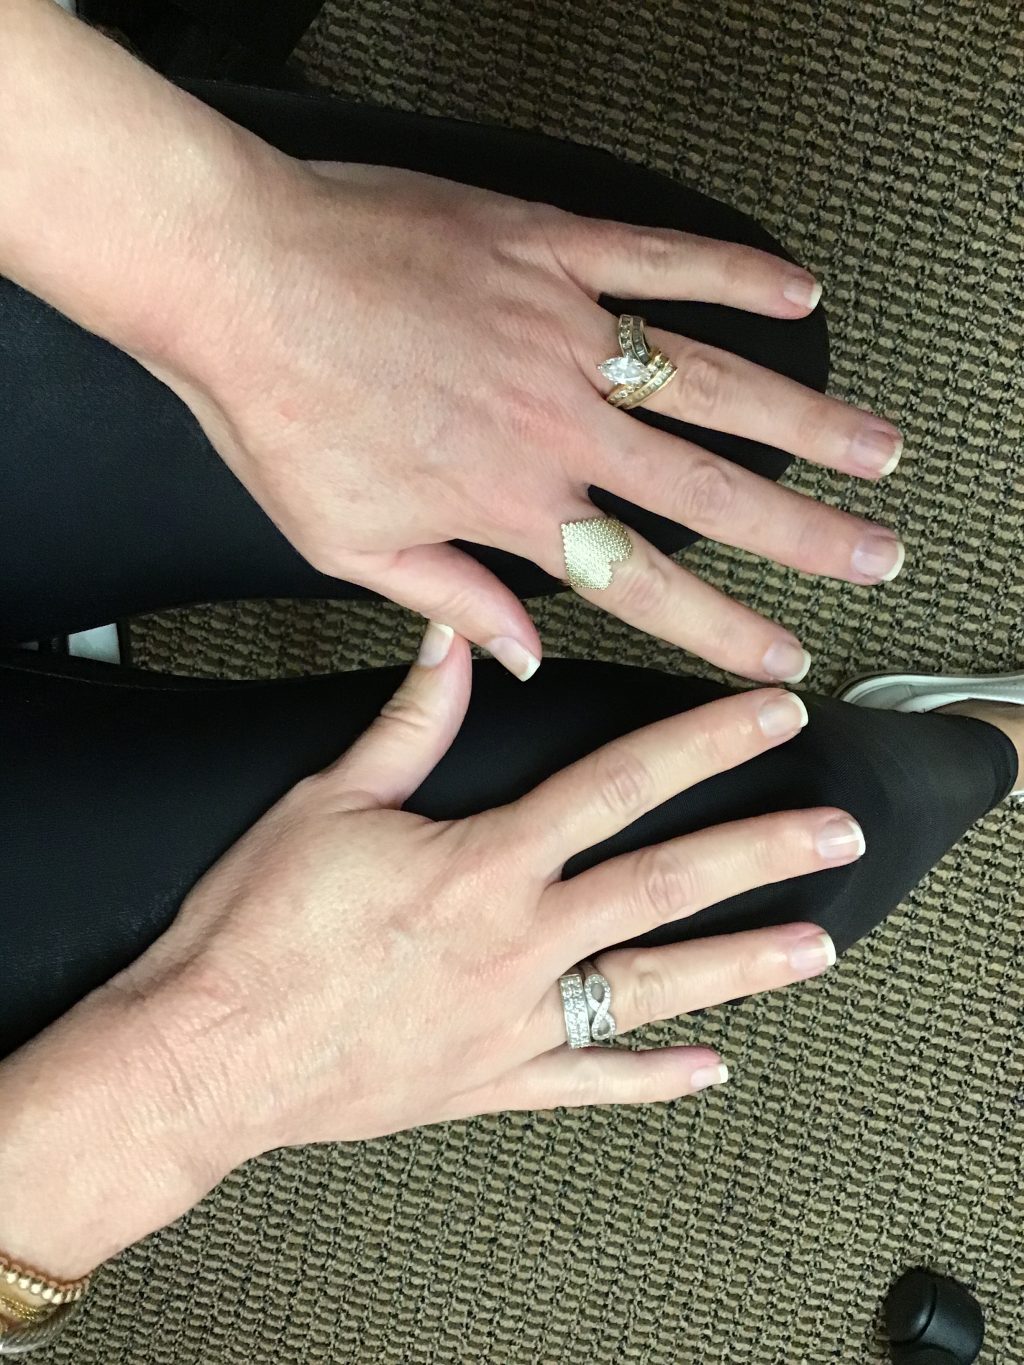 Lisa's hands after receiving laser treatments and Radiesse filler at LJC. Visibly less sun damage, less veiny, and more youthful-looking.